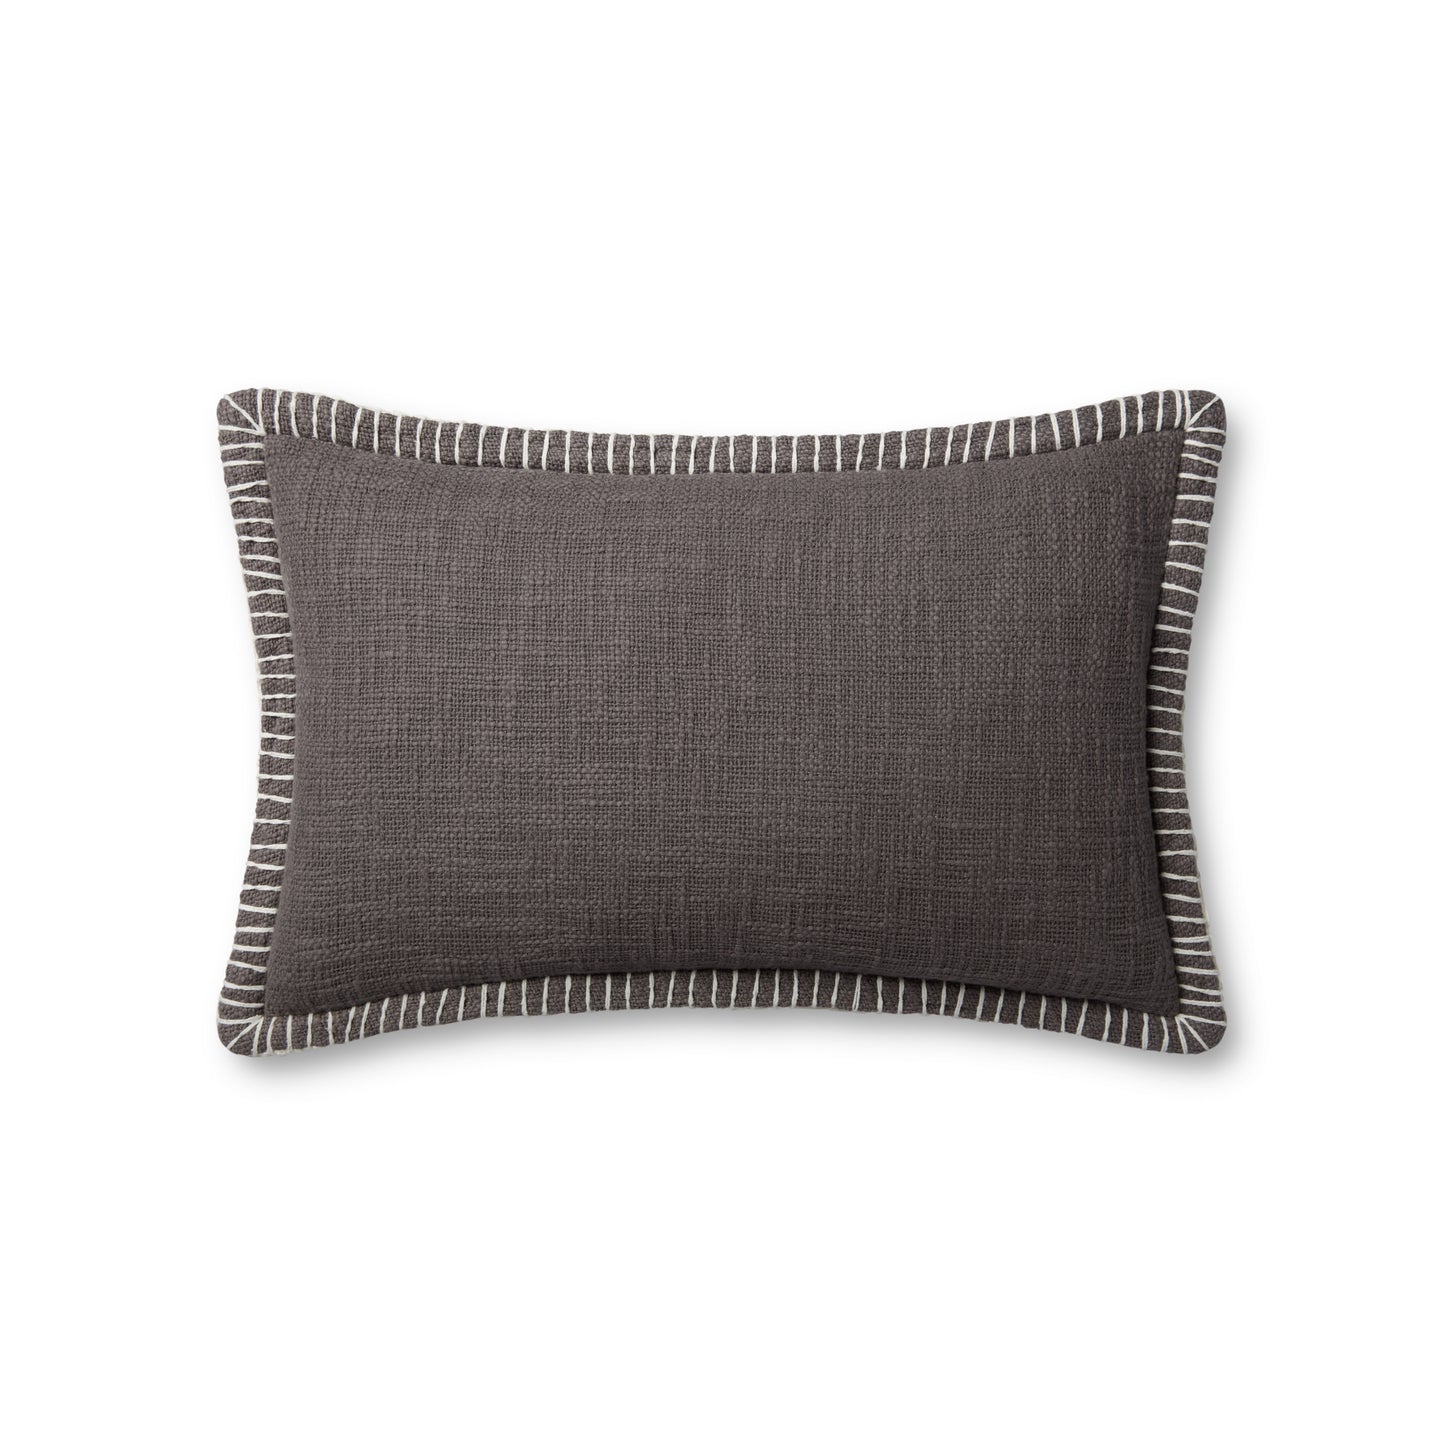 Photo of a pillow;  PLL0109 Grey 13'' x 21'' Cover w/Poly Pillow